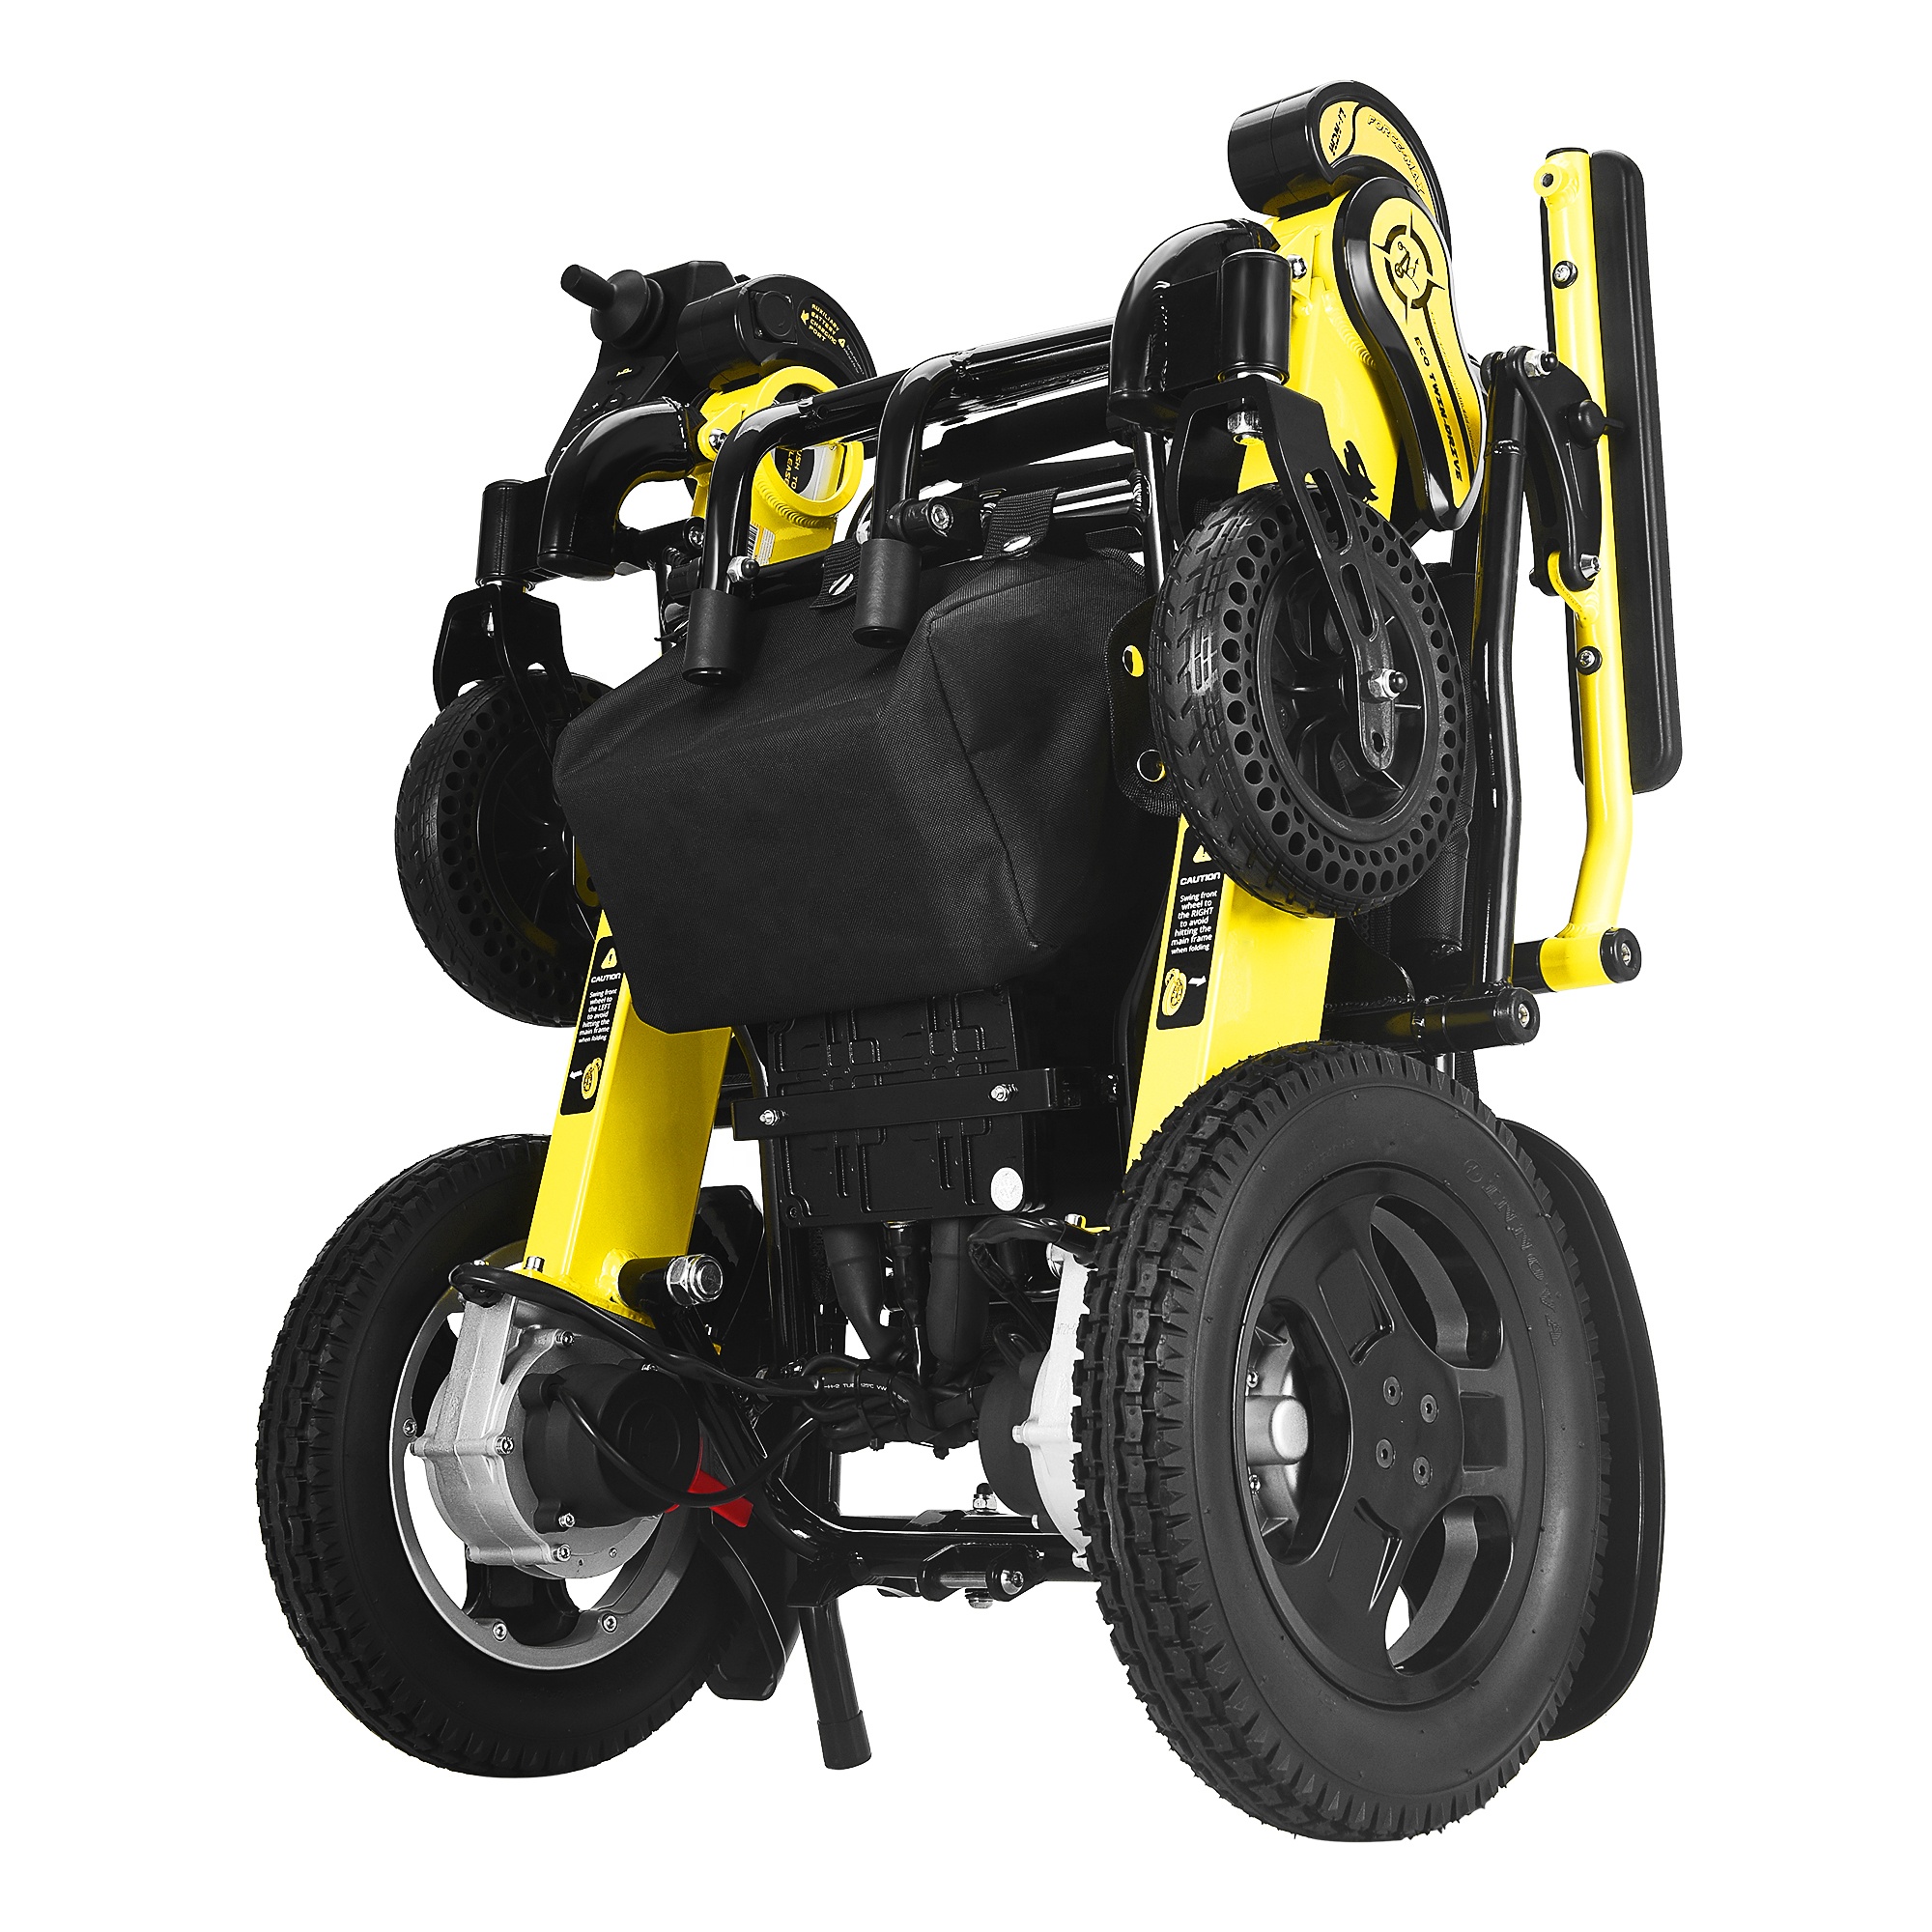 Features of Portable Electric Wheelchairs for Adults